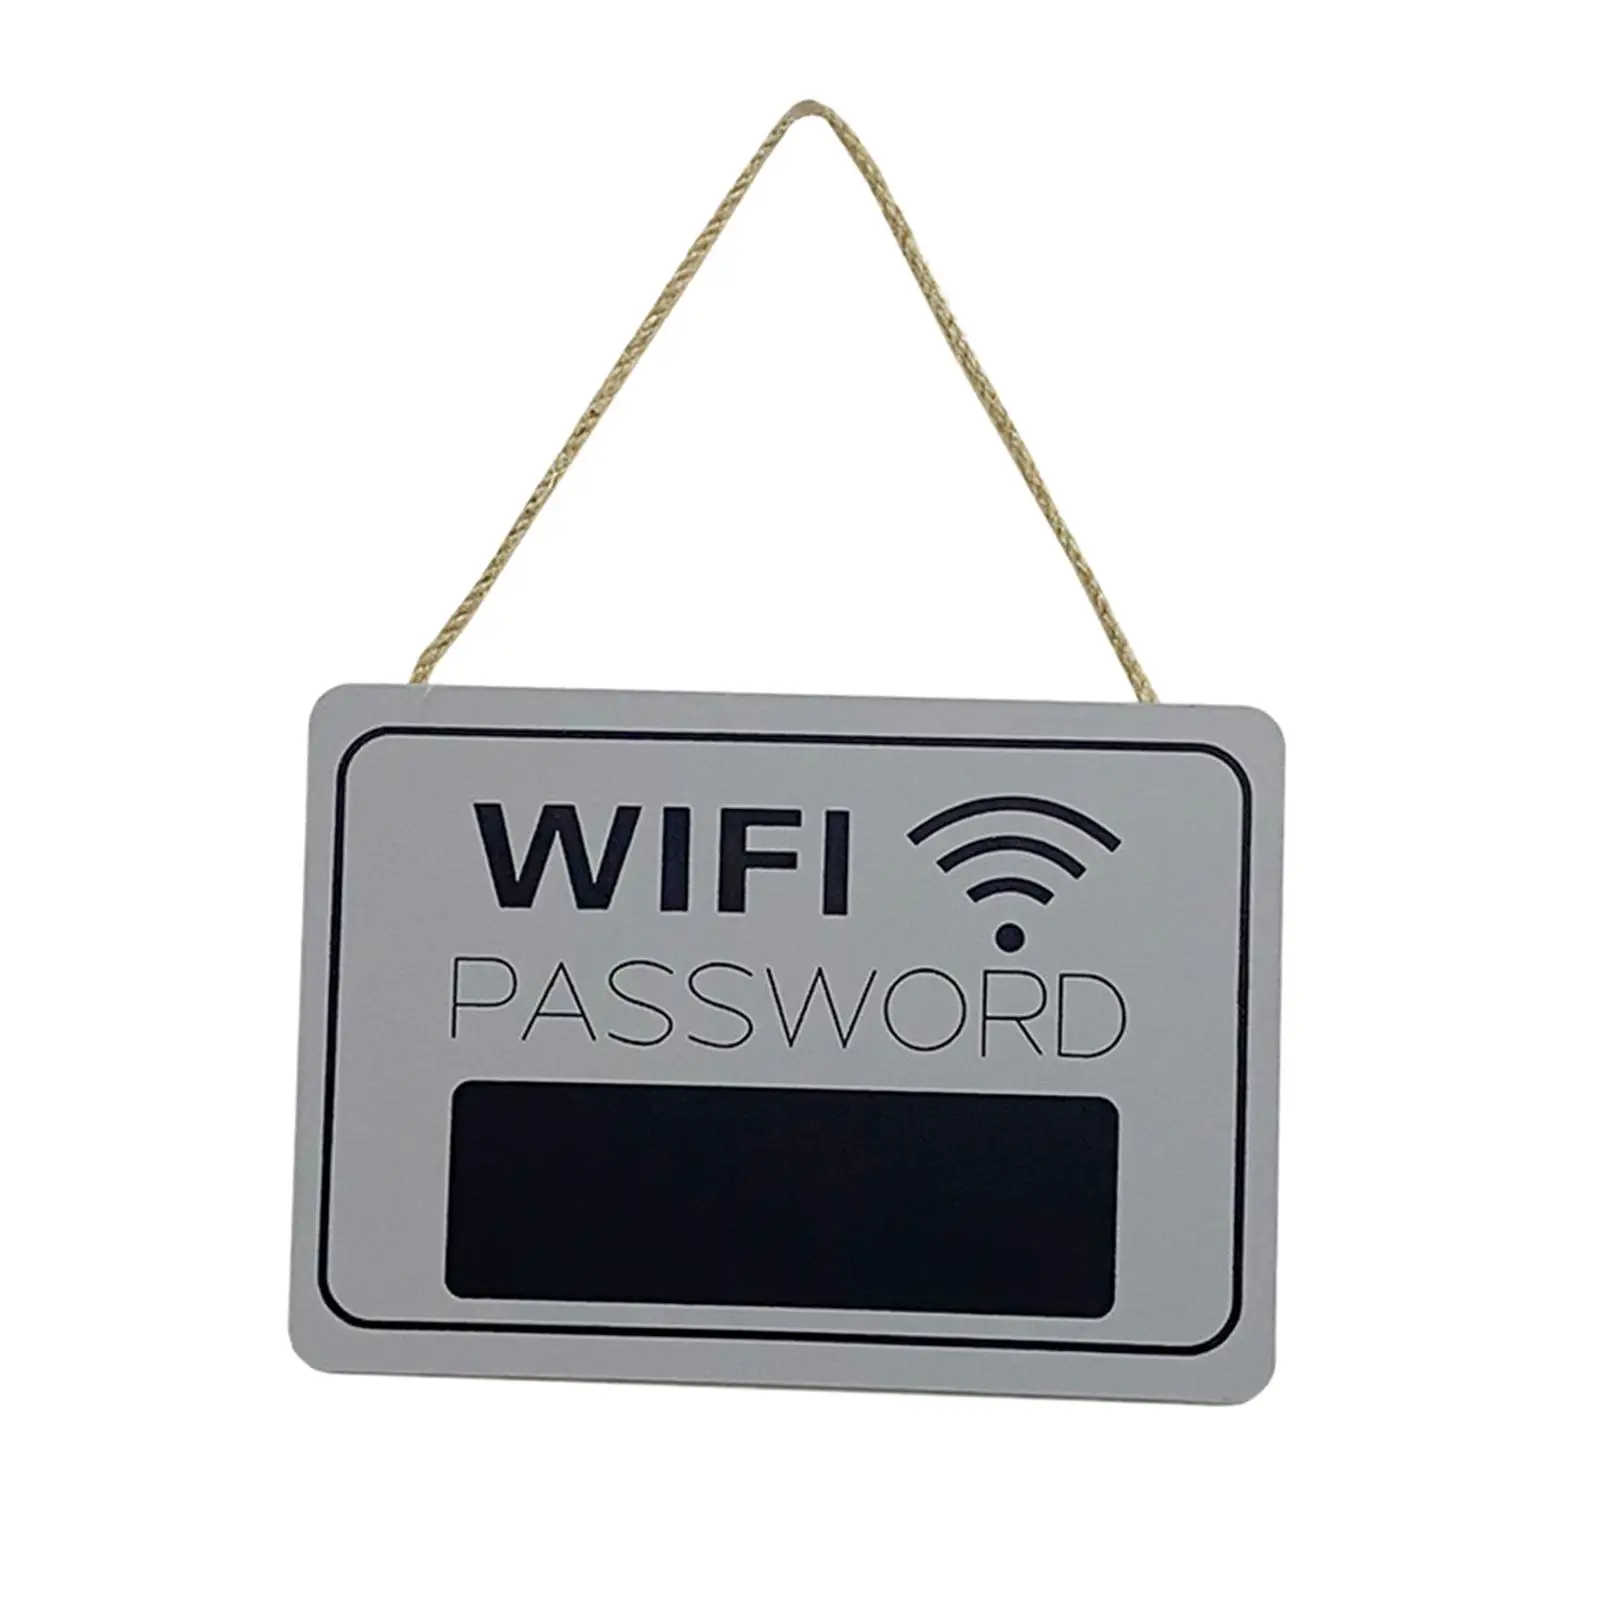 WiFi Password Sign Desktop or Wall Mounted Wood WiFi Sign Display Holder for Desktop Banquet Coffee Tables Business Restaurants